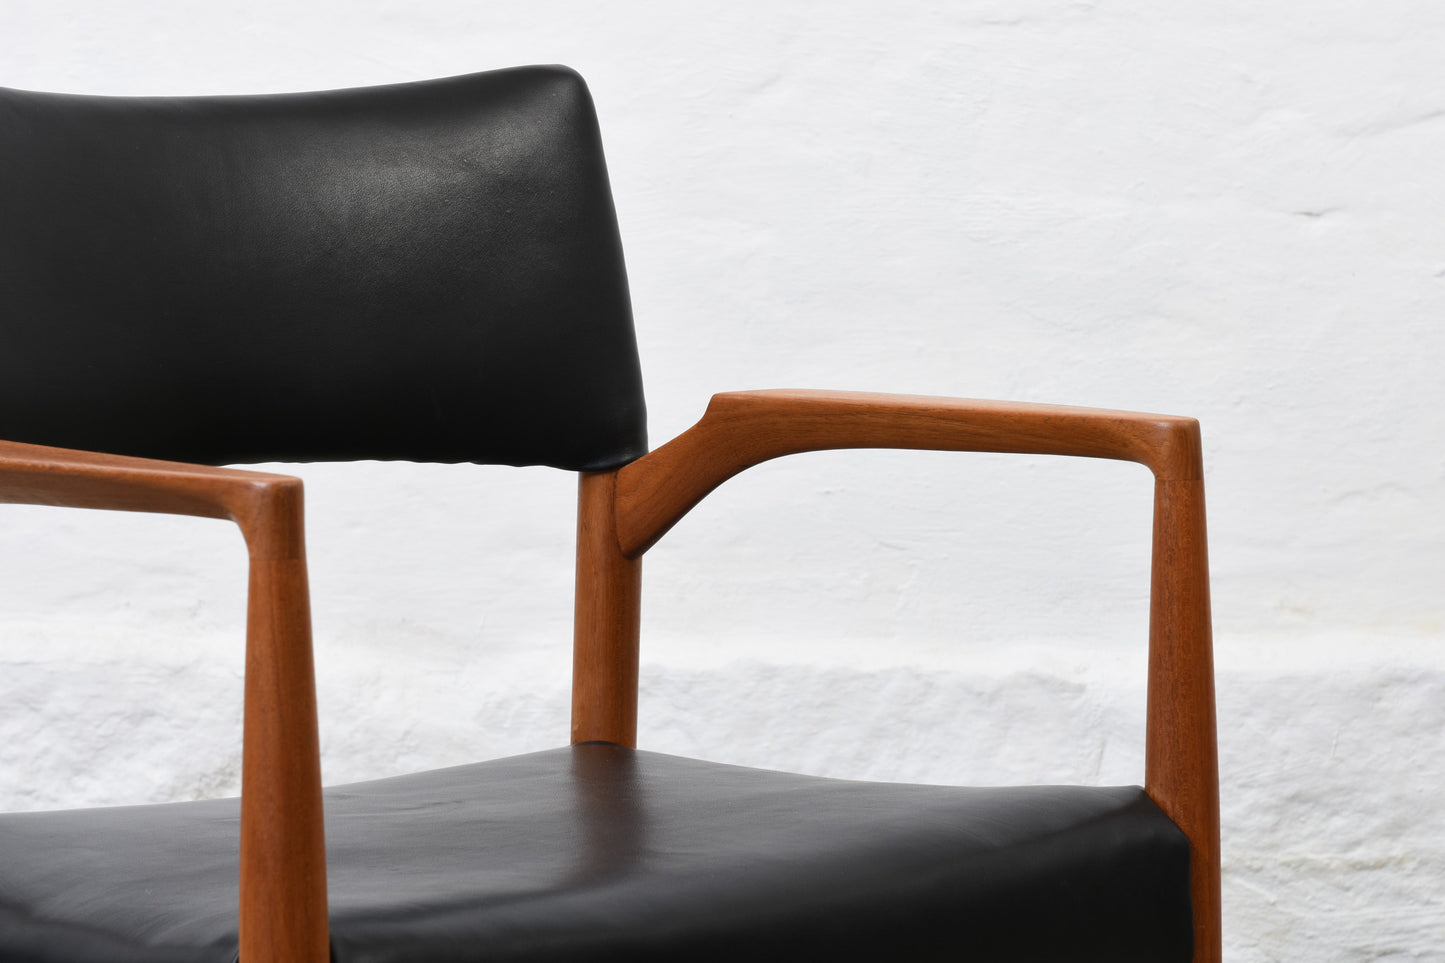 Newly reupholstered: Teak + leather armchair by Willy Schou Andersen